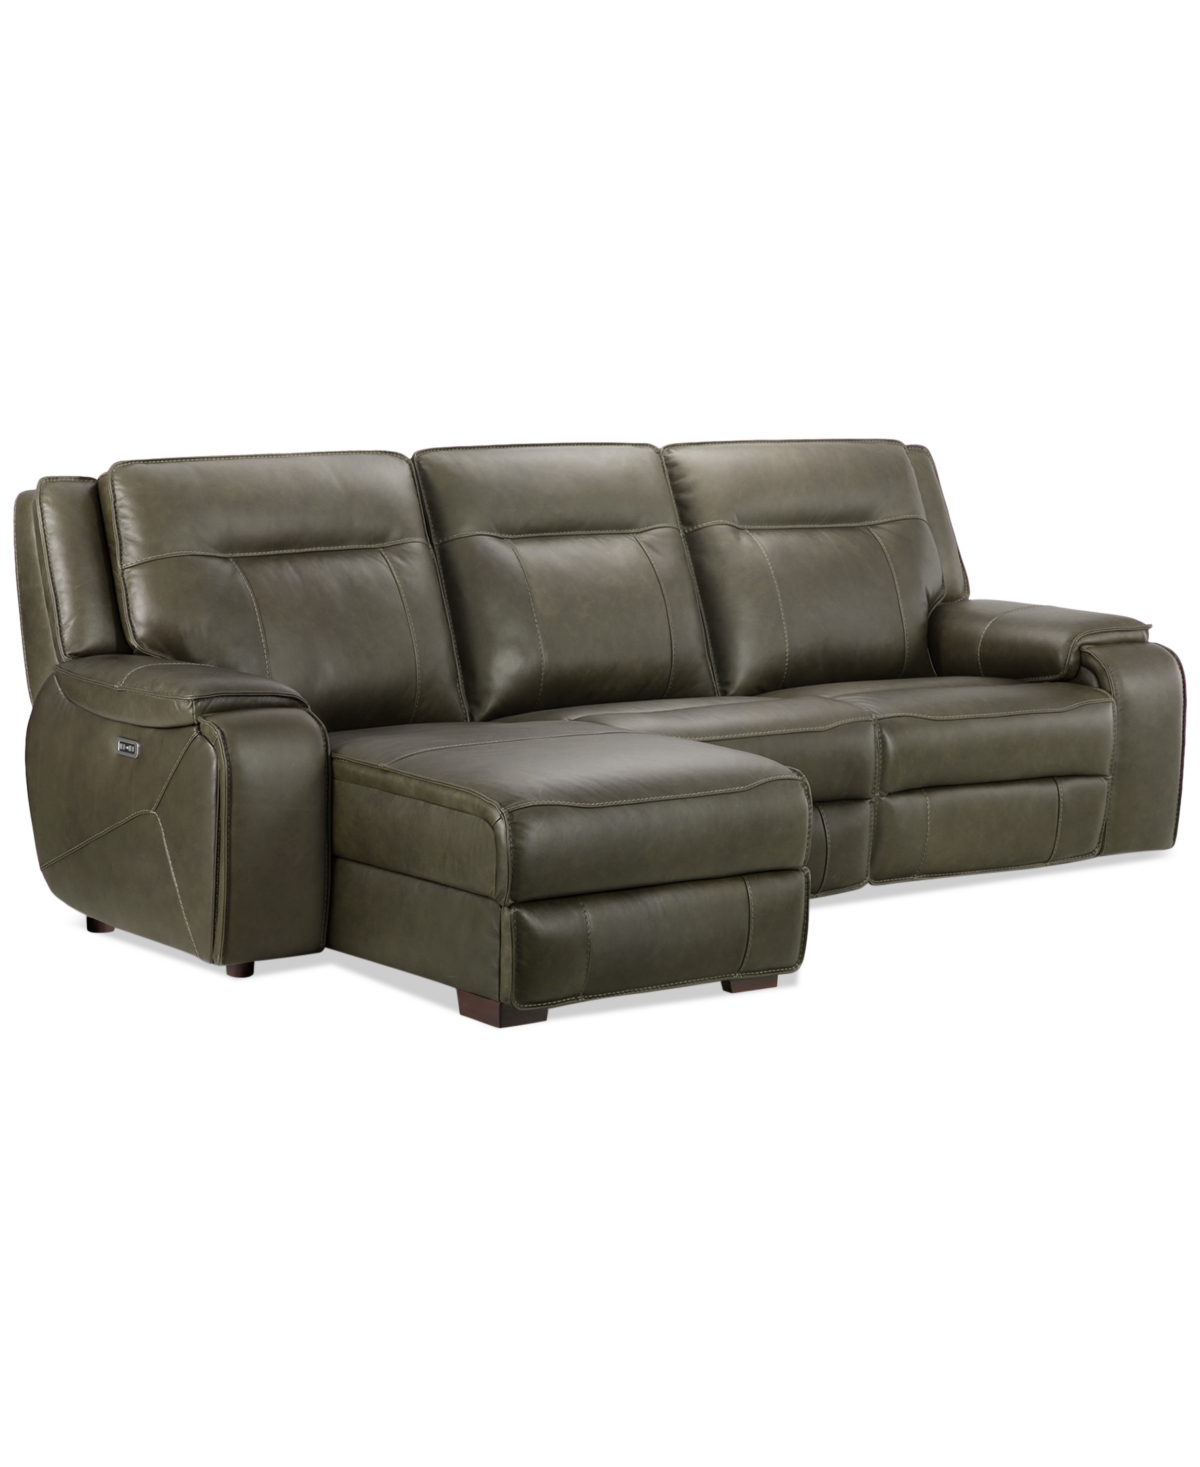 Macy's Hansley 3-pc. Zero Gravity Leather Sectional With Power Recliner And Chaise, Created For  In Grey